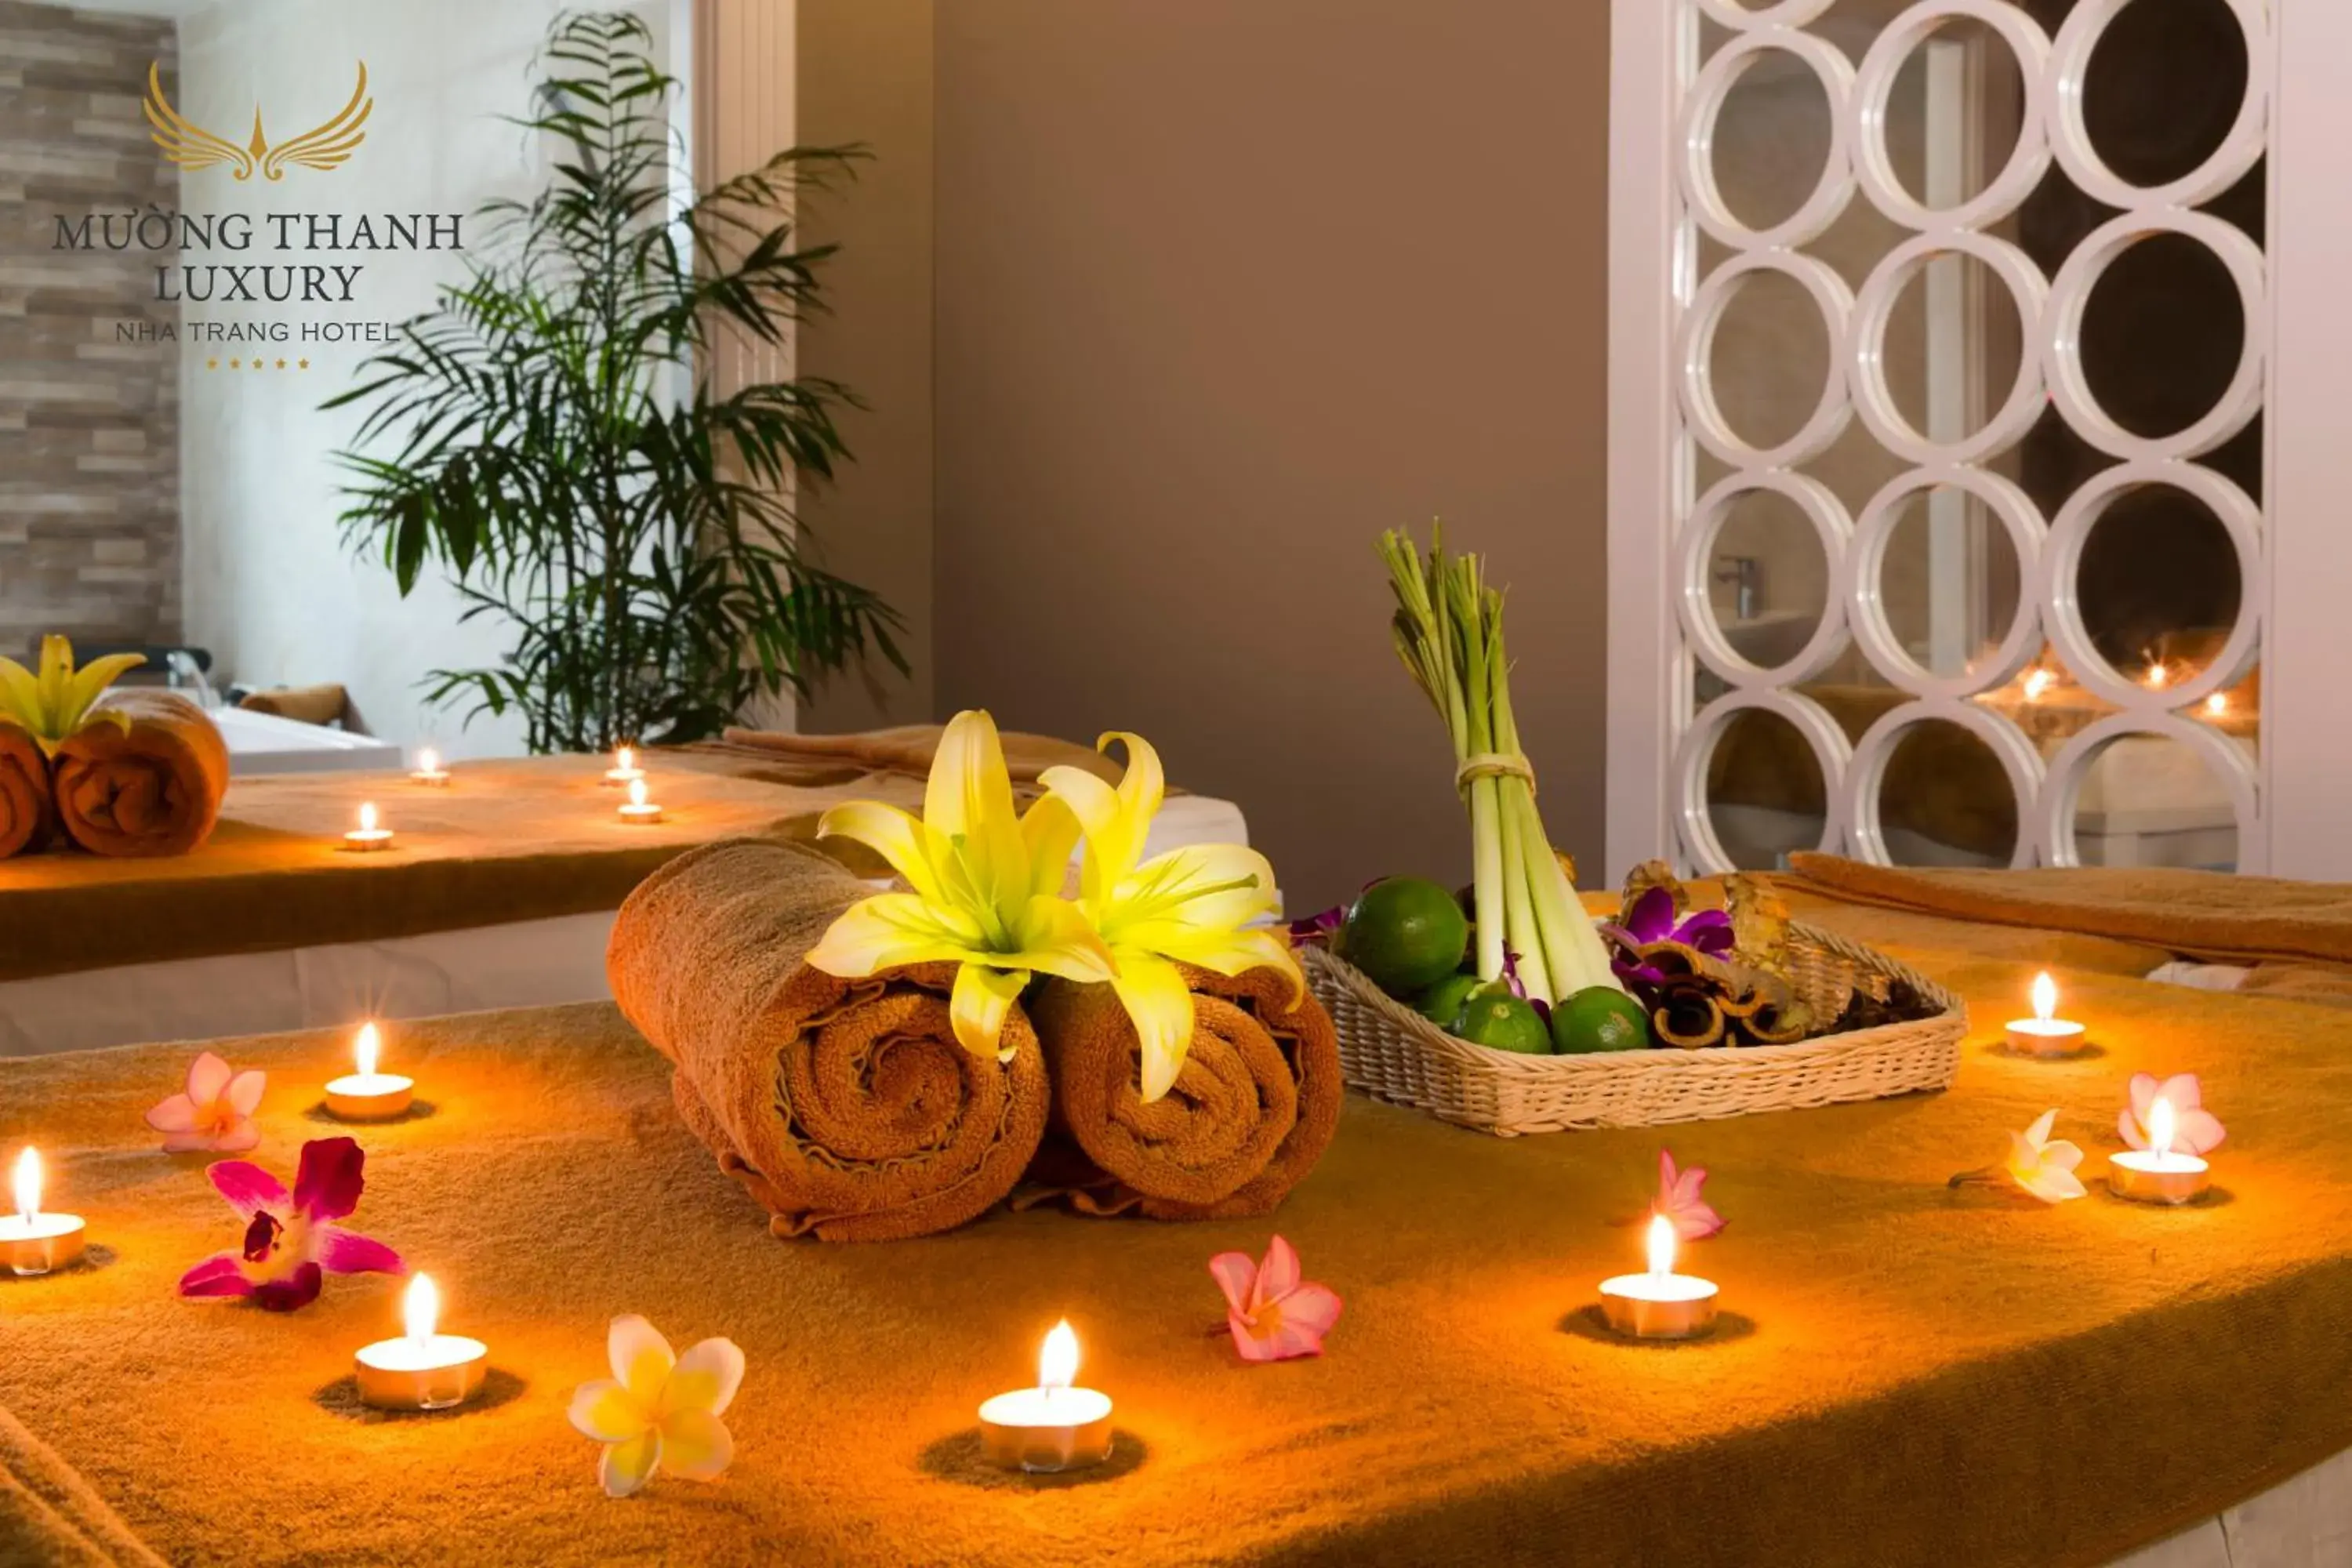 Spa and wellness centre/facilities in Muong Thanh Luxury Nha Trang Hotel